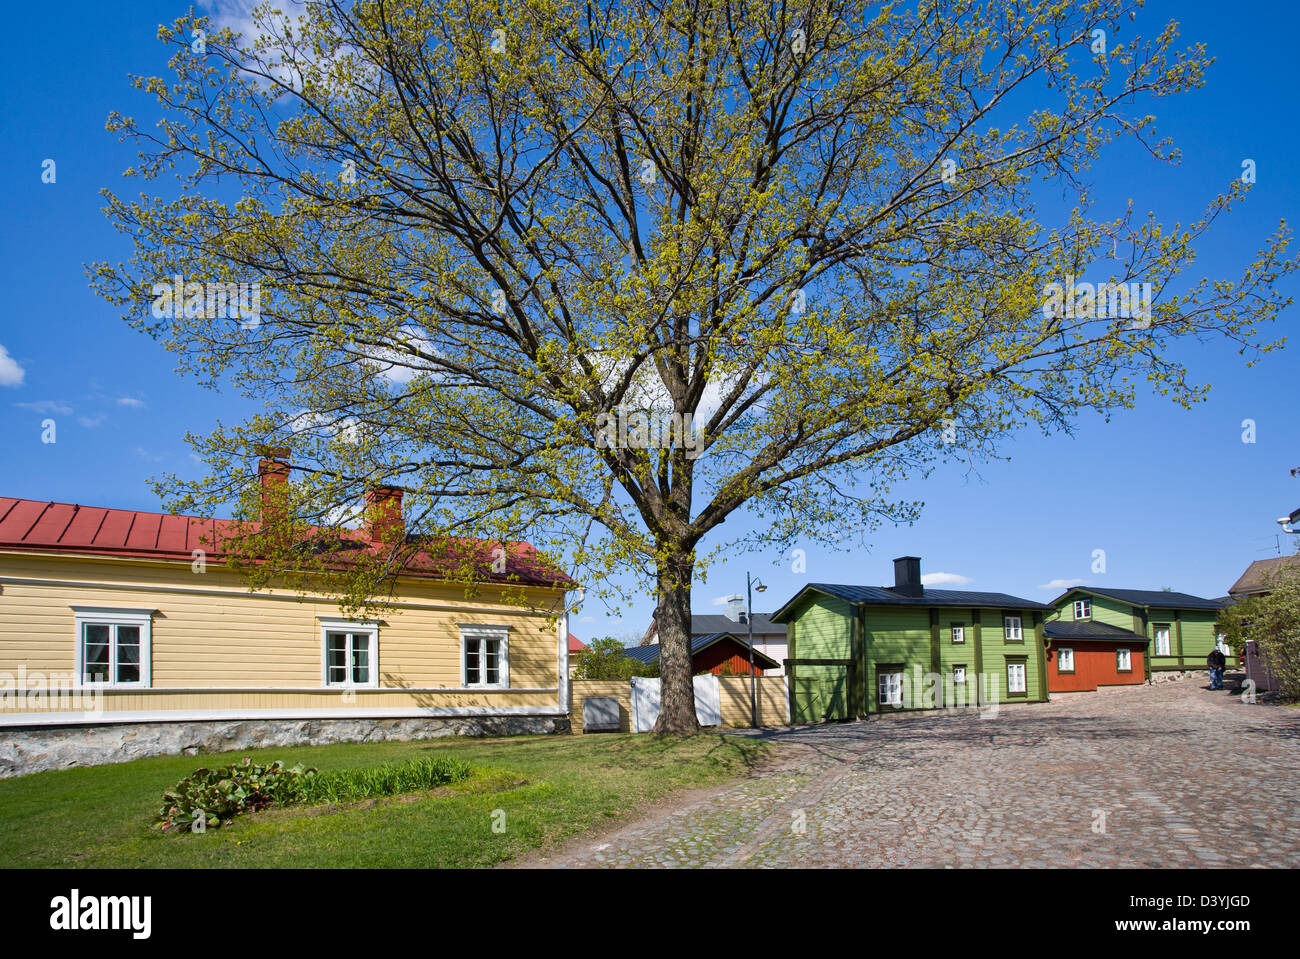 Finland, Southern Finland, Porvoo, charming old wooden houses and cobblestone lanes at Old Porvoo Stock Photo